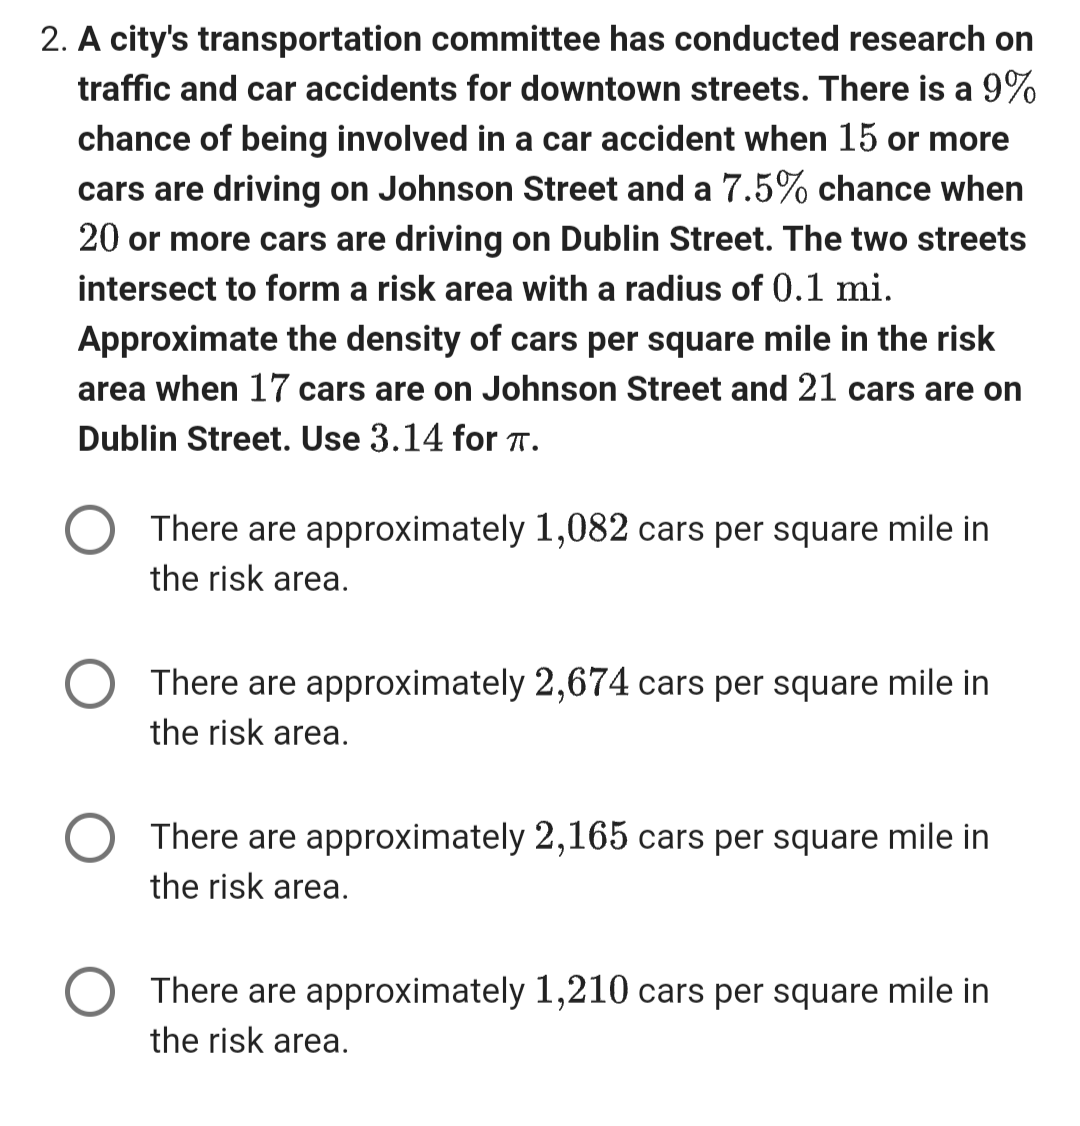 2. A city's transportation committee has conducted research on
traffic and car accidents for downtown streets. There is a 9%
chance of being involved in a car accident when 15 or more
cars are driving on Johnson Street and a 7.5% chance when
20 or more cars are driving on Dublin Street. The two streets
intersect to form a risk area with a radius of 0.1 mi.
Approximate the density of cars per square mile in the risk
area when 17 cars are on Johnson Street and 21 cars are on
Dublin Street. Use 3.14 for TT.
There are approximately 1,082 cars per square mile in
the risk area.
There are approximately 2,674 cars per square mile in
the risk area.
There are approximately 2,165 cars per square mile in
the risk area.
There are approximately 1,210 cars per square mile in
the risk area.